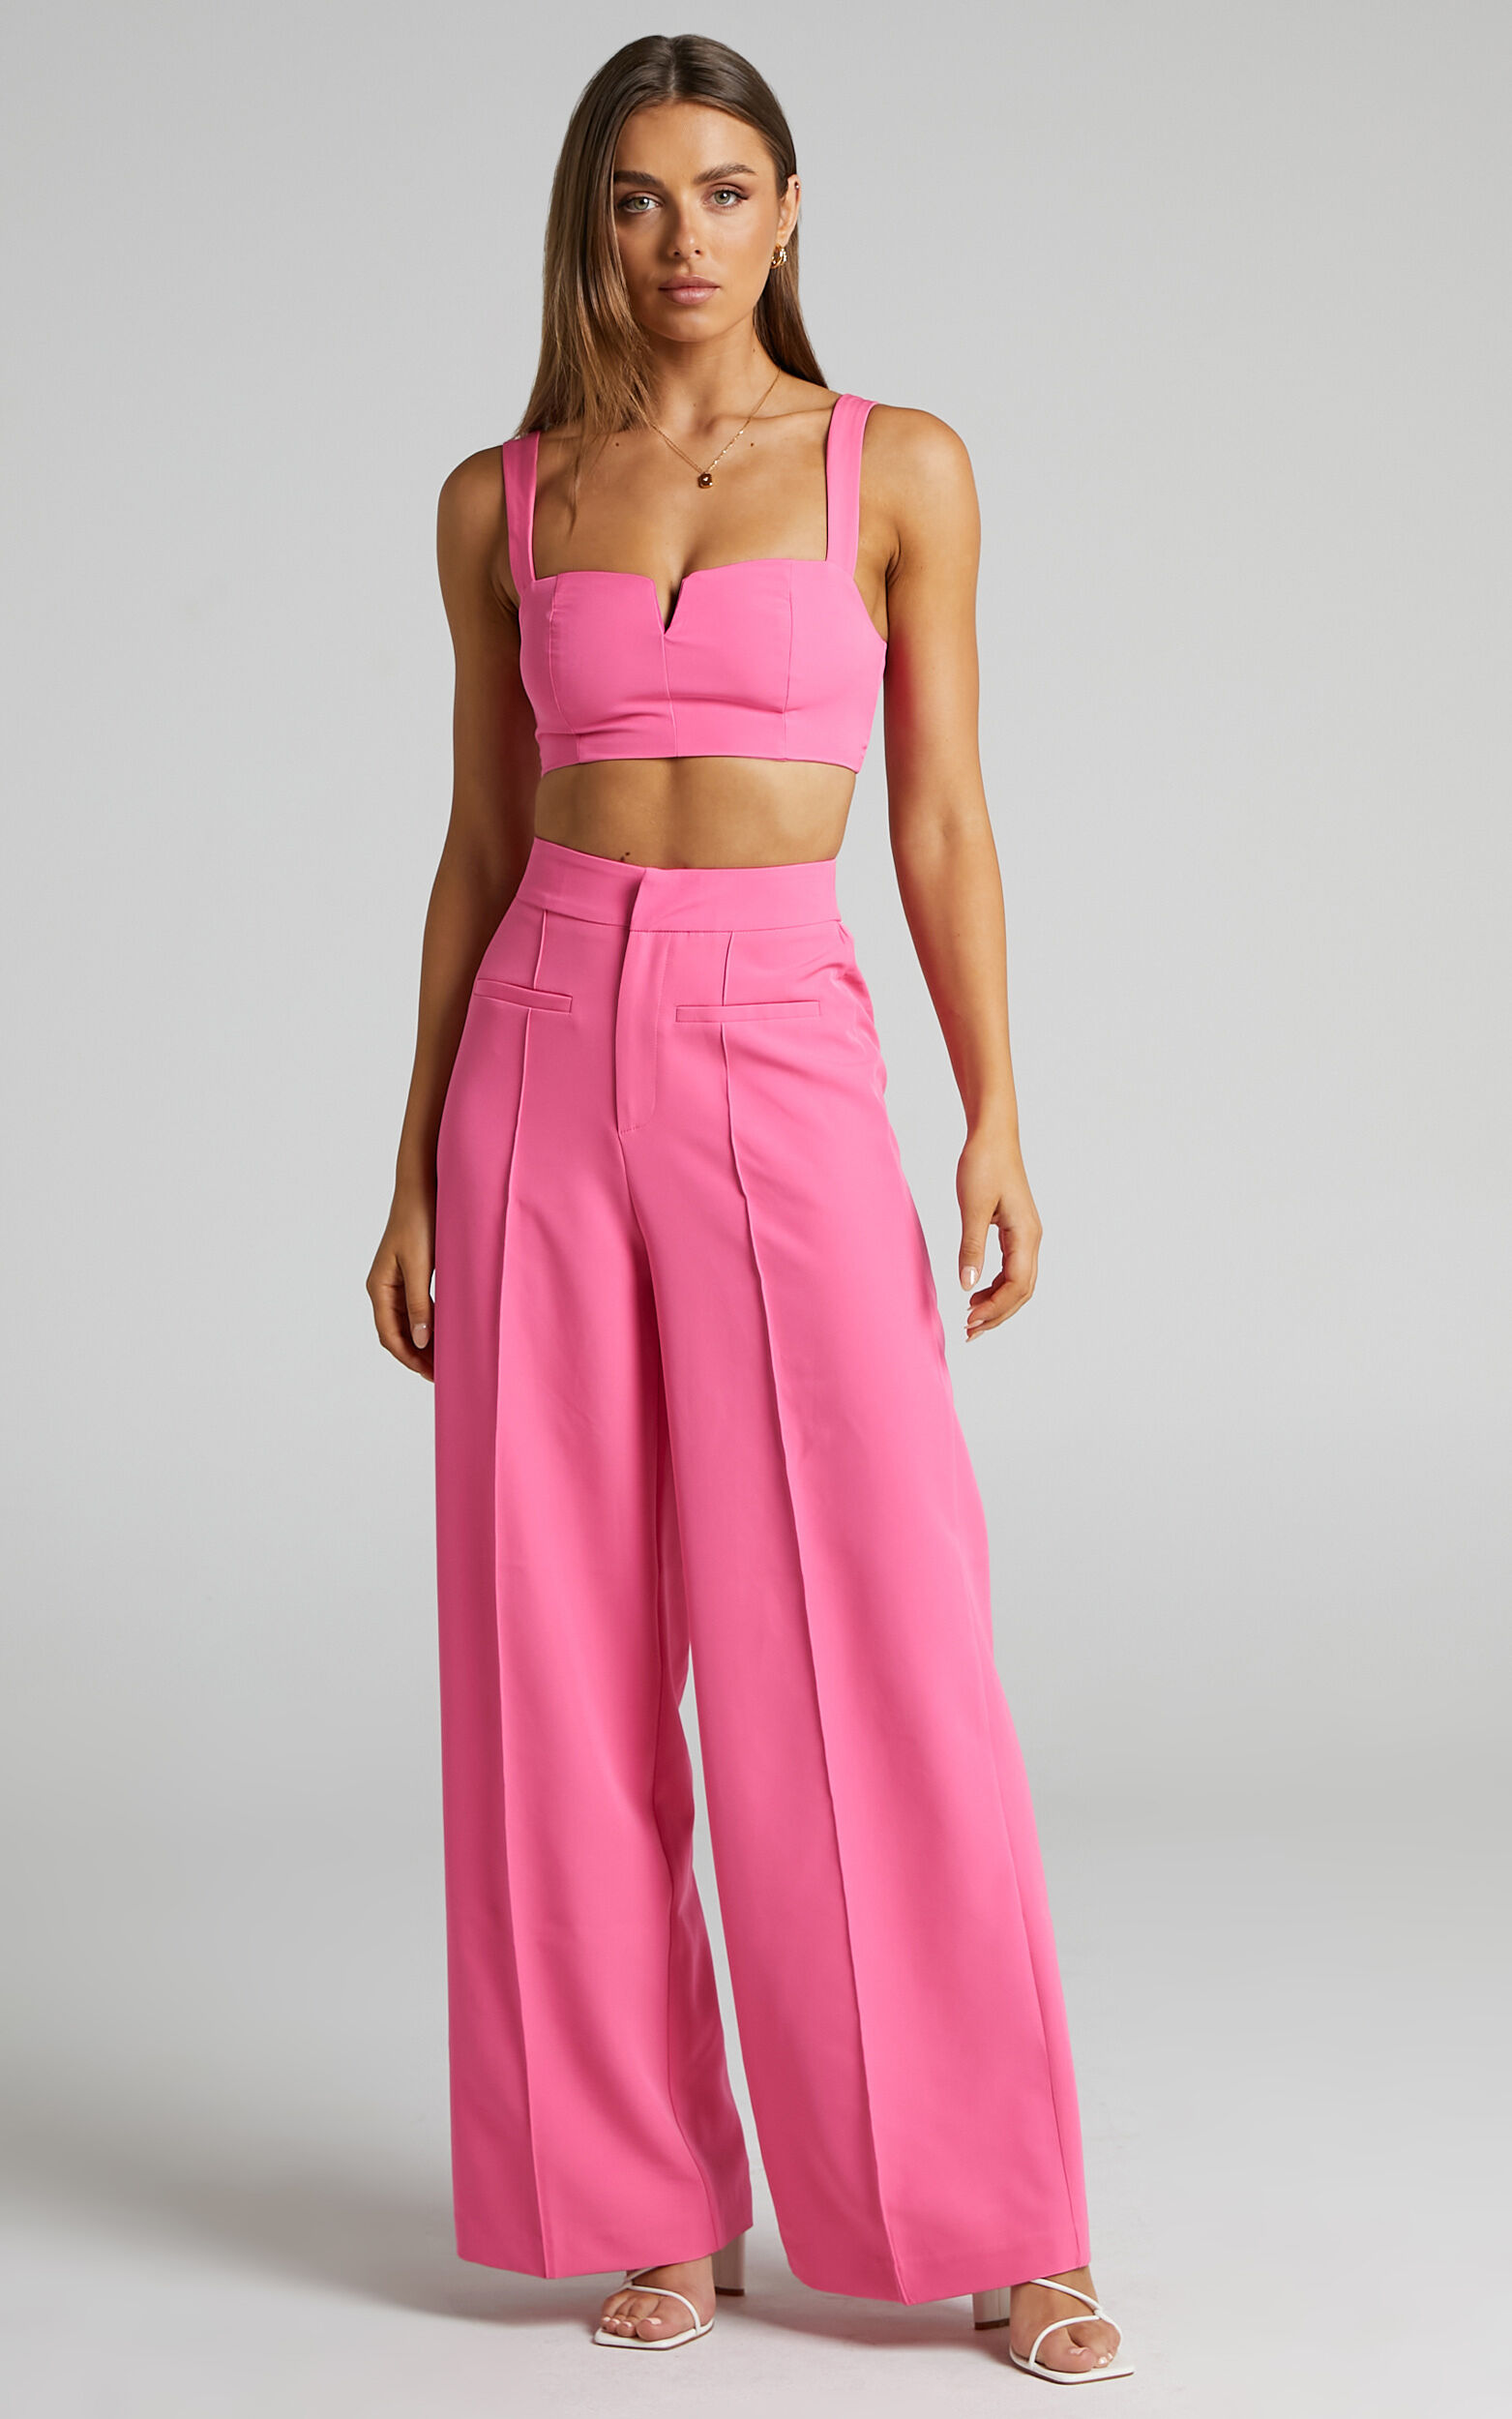 Maida Two Piece Set - V Front Crop Top and Wide Leg Pants Set in Pink - 06, PNK1